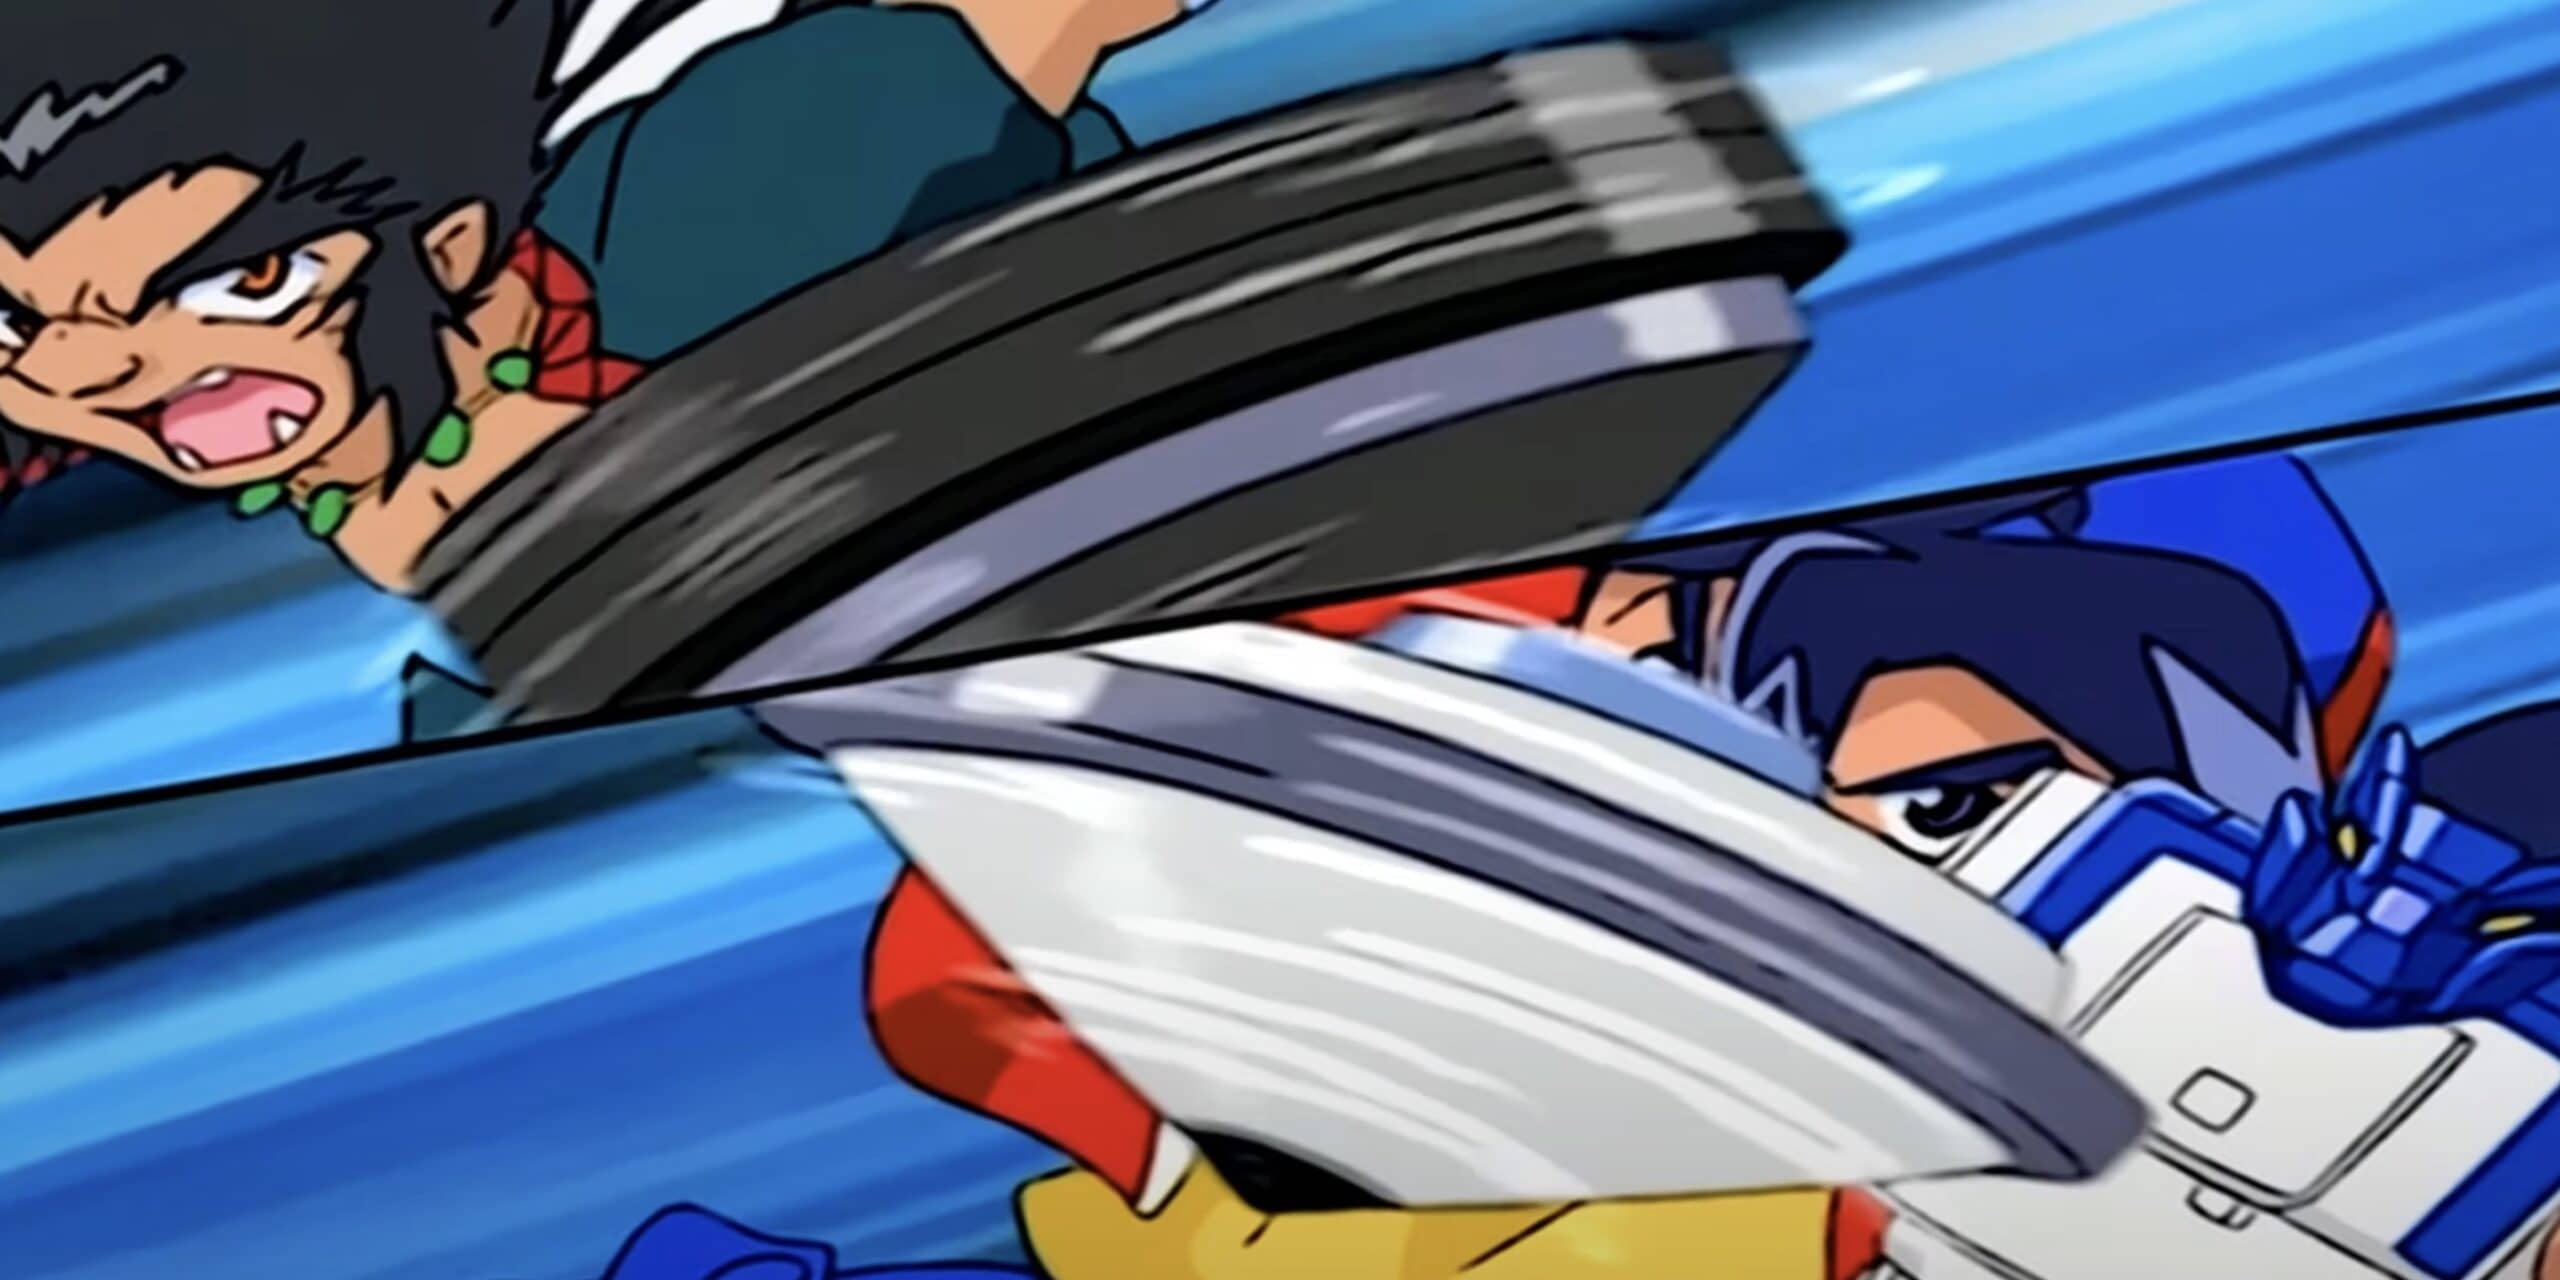 Beyblade Anime Aims to Be the Coolest Show of 2023